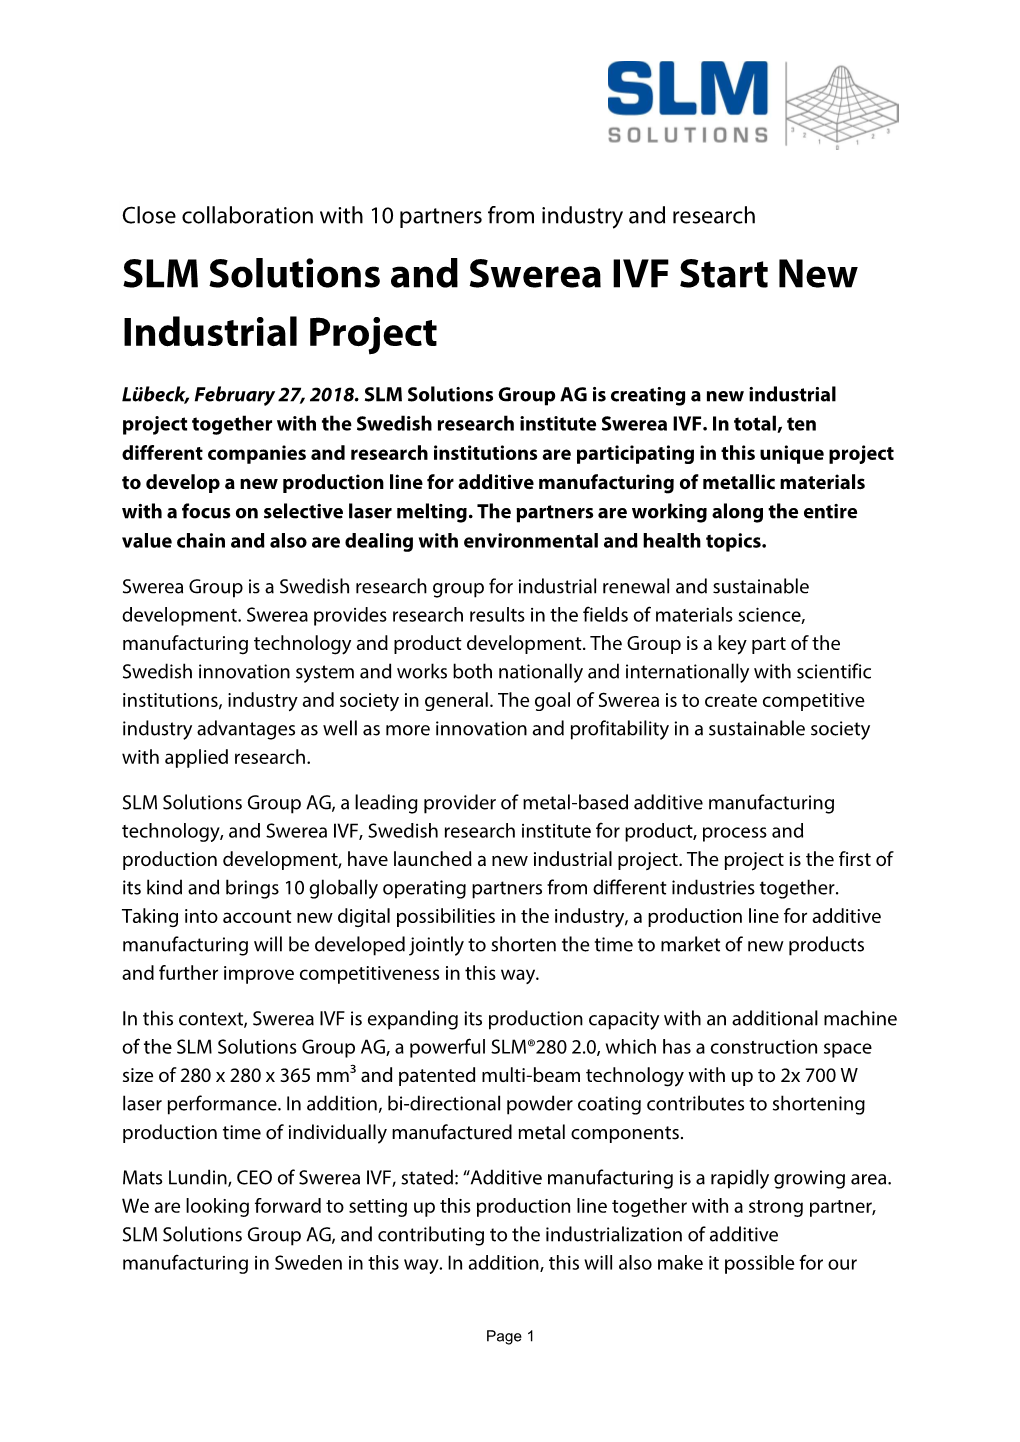 SLM Solutions and Swerea IVF Start New Industrial Project